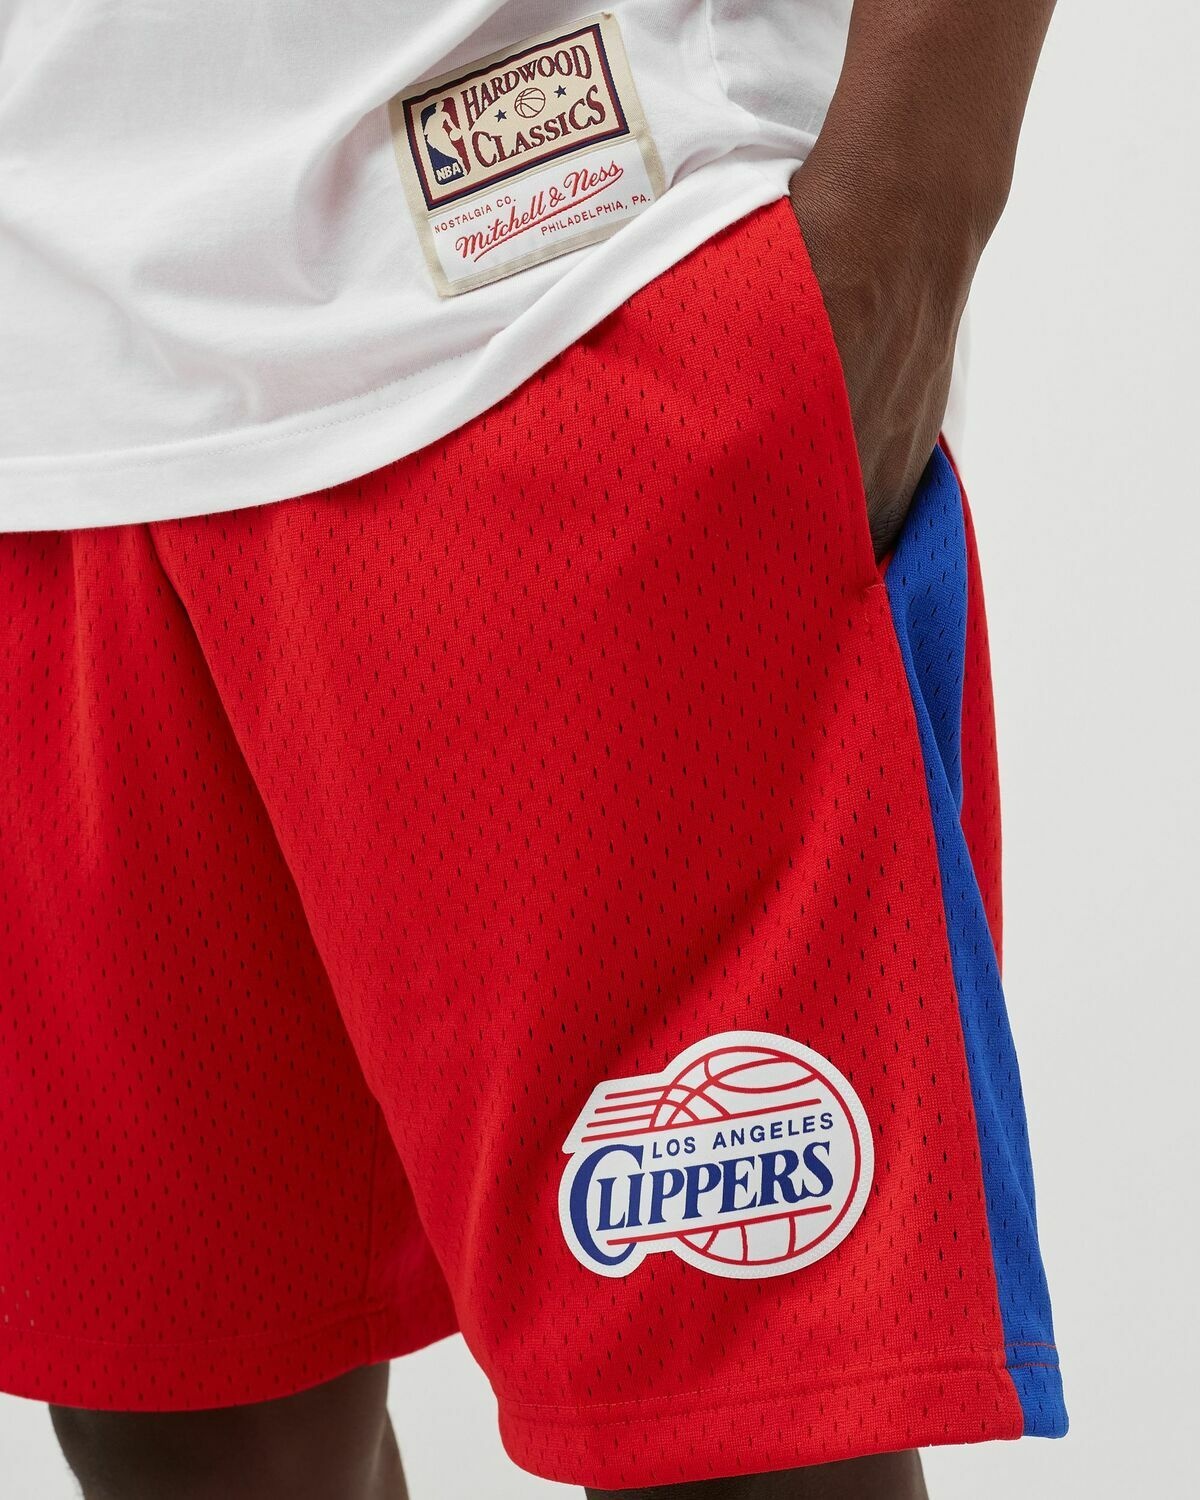 Mitchell & Ness Nba Swingman Shorts Los Angeles Clippers 2000 01 Red - Mens - Sport & Team Shorts